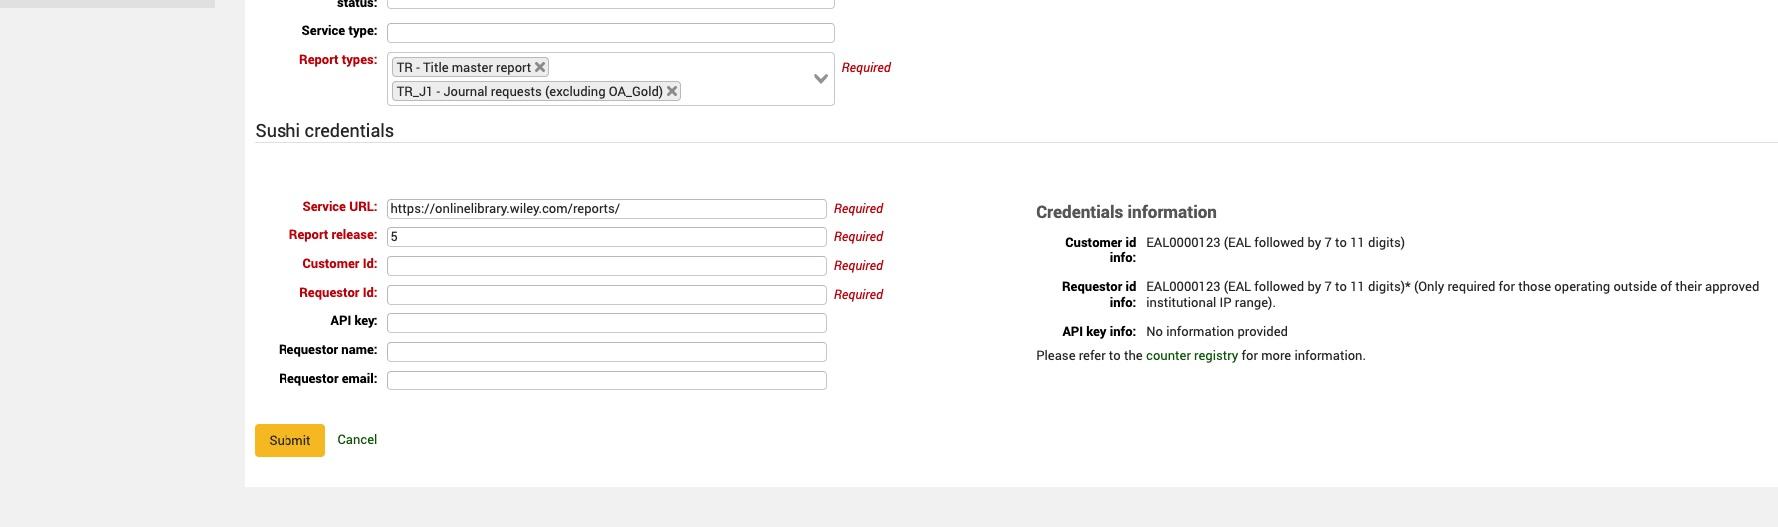 The SUSHI credentials section of the Add data provider screen, showing four fields as being required: service URL, report release, customer ID, requestor ID.